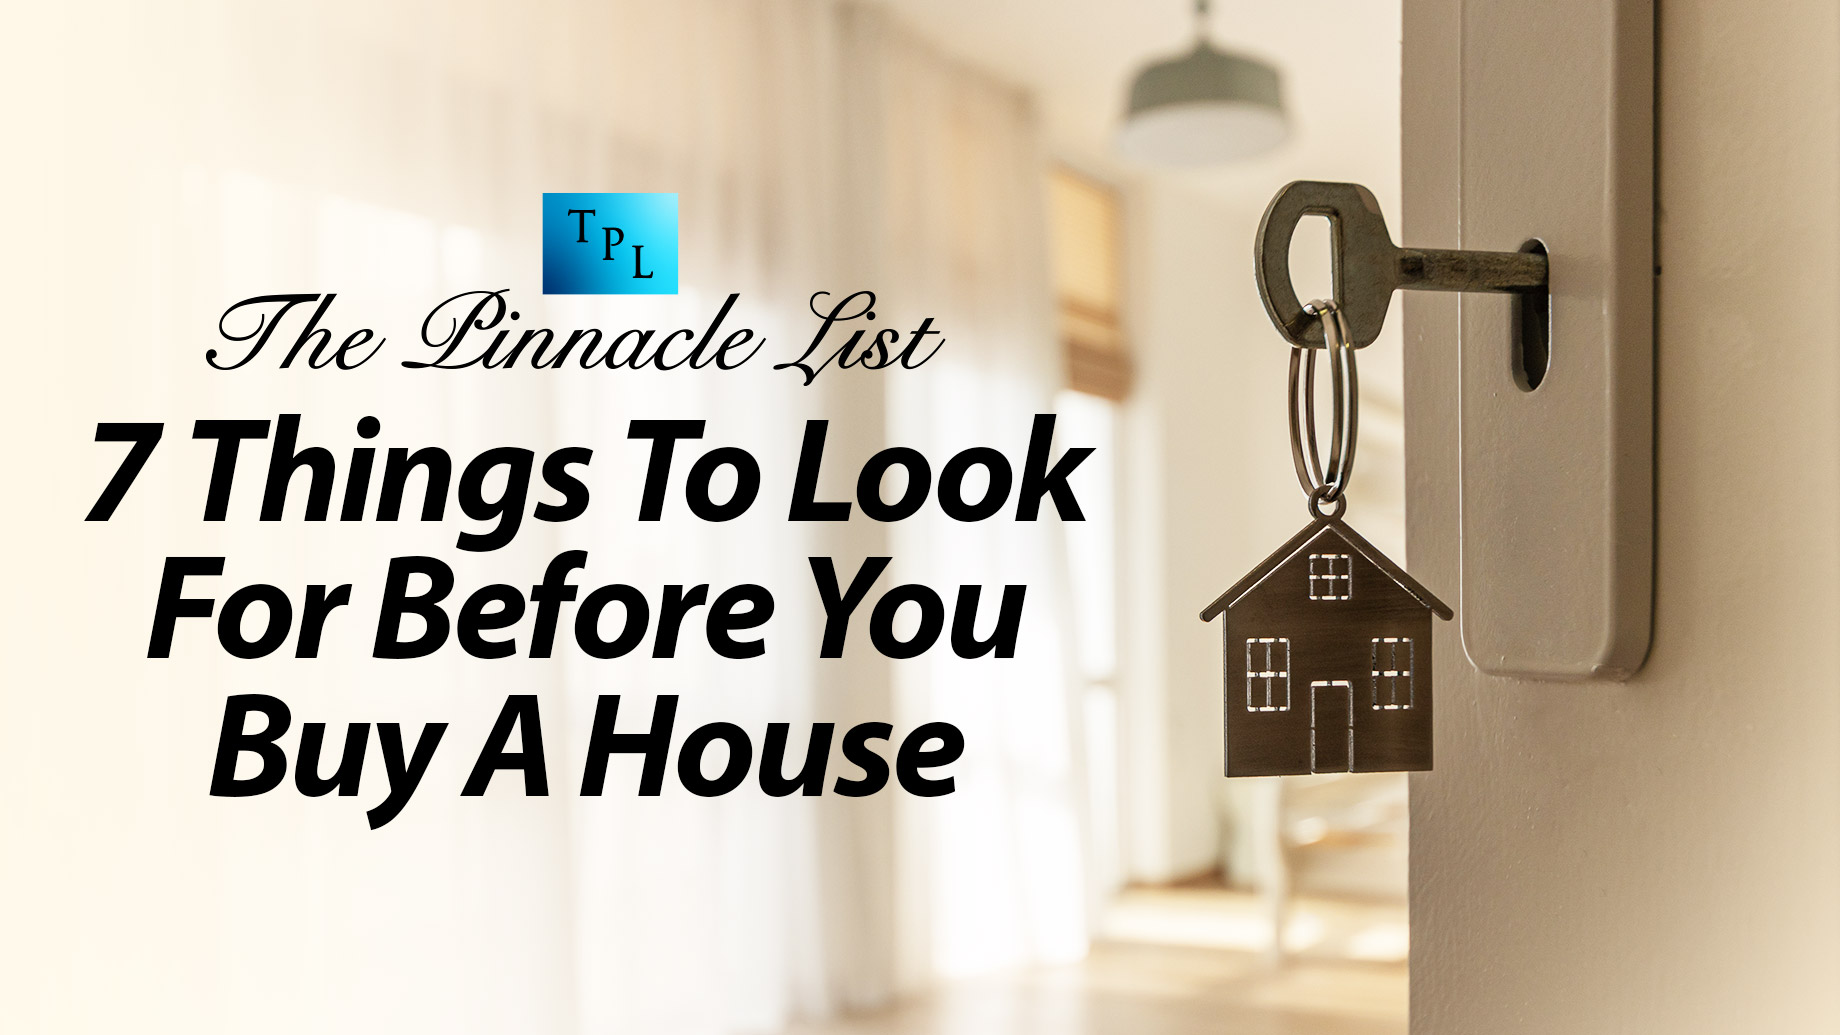 7 Things To Look For Before You Buy A House